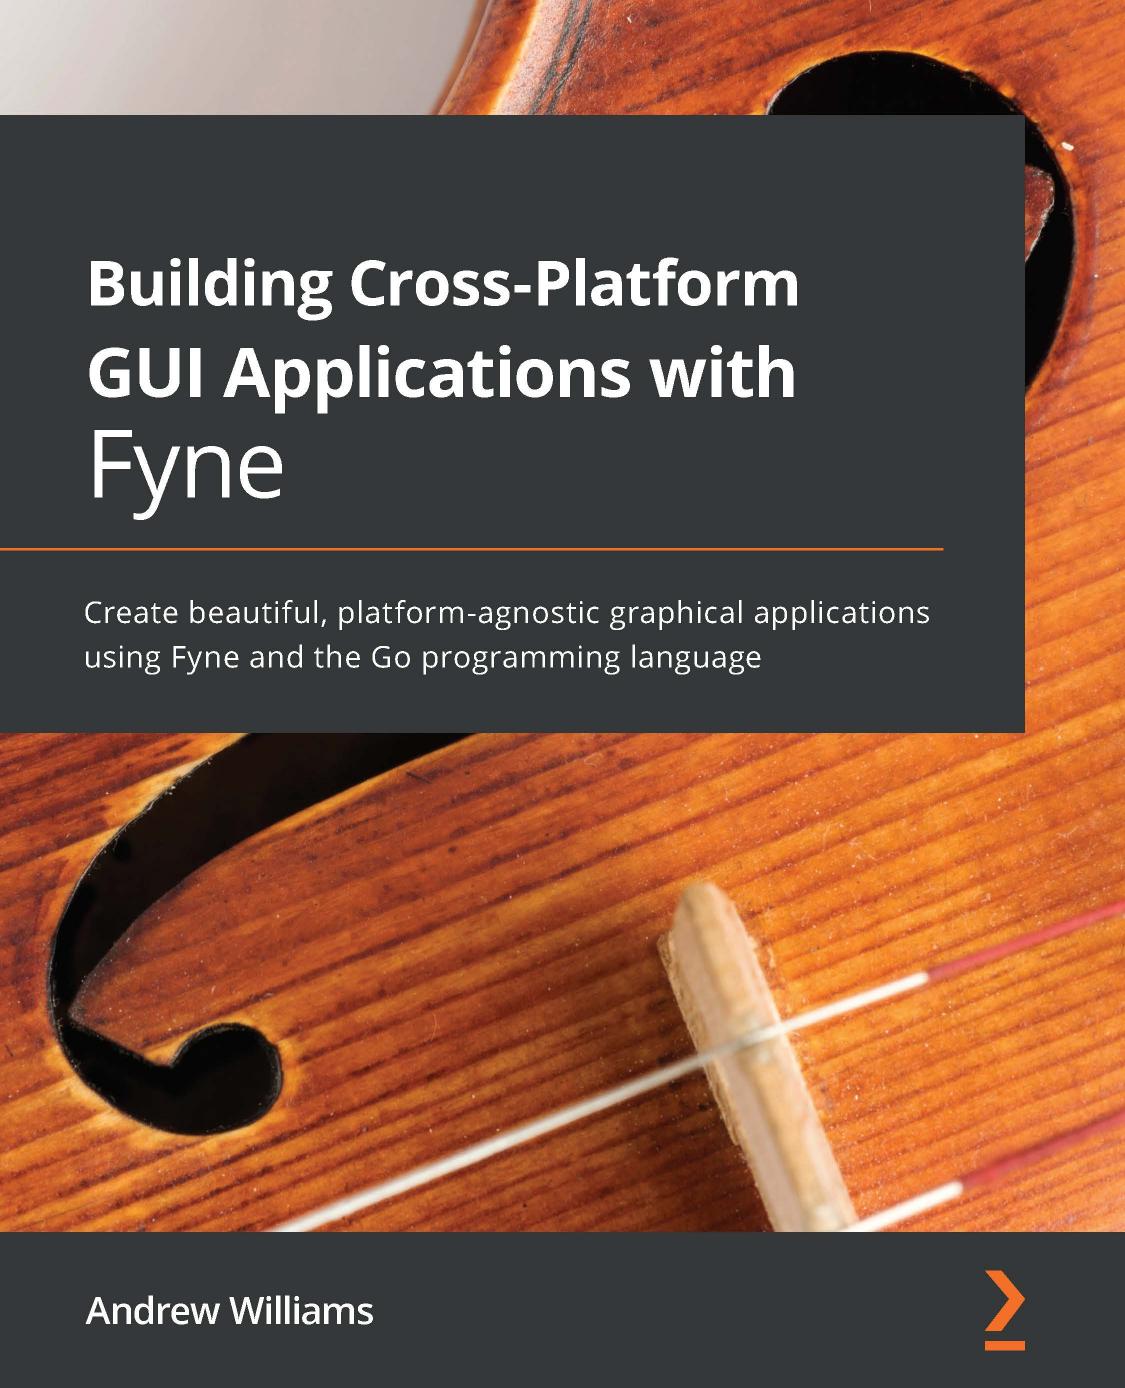 Andrew Williams: Building Cross-Platform GUI Applications with Fyne (2021, Packt Publishing, Limited)